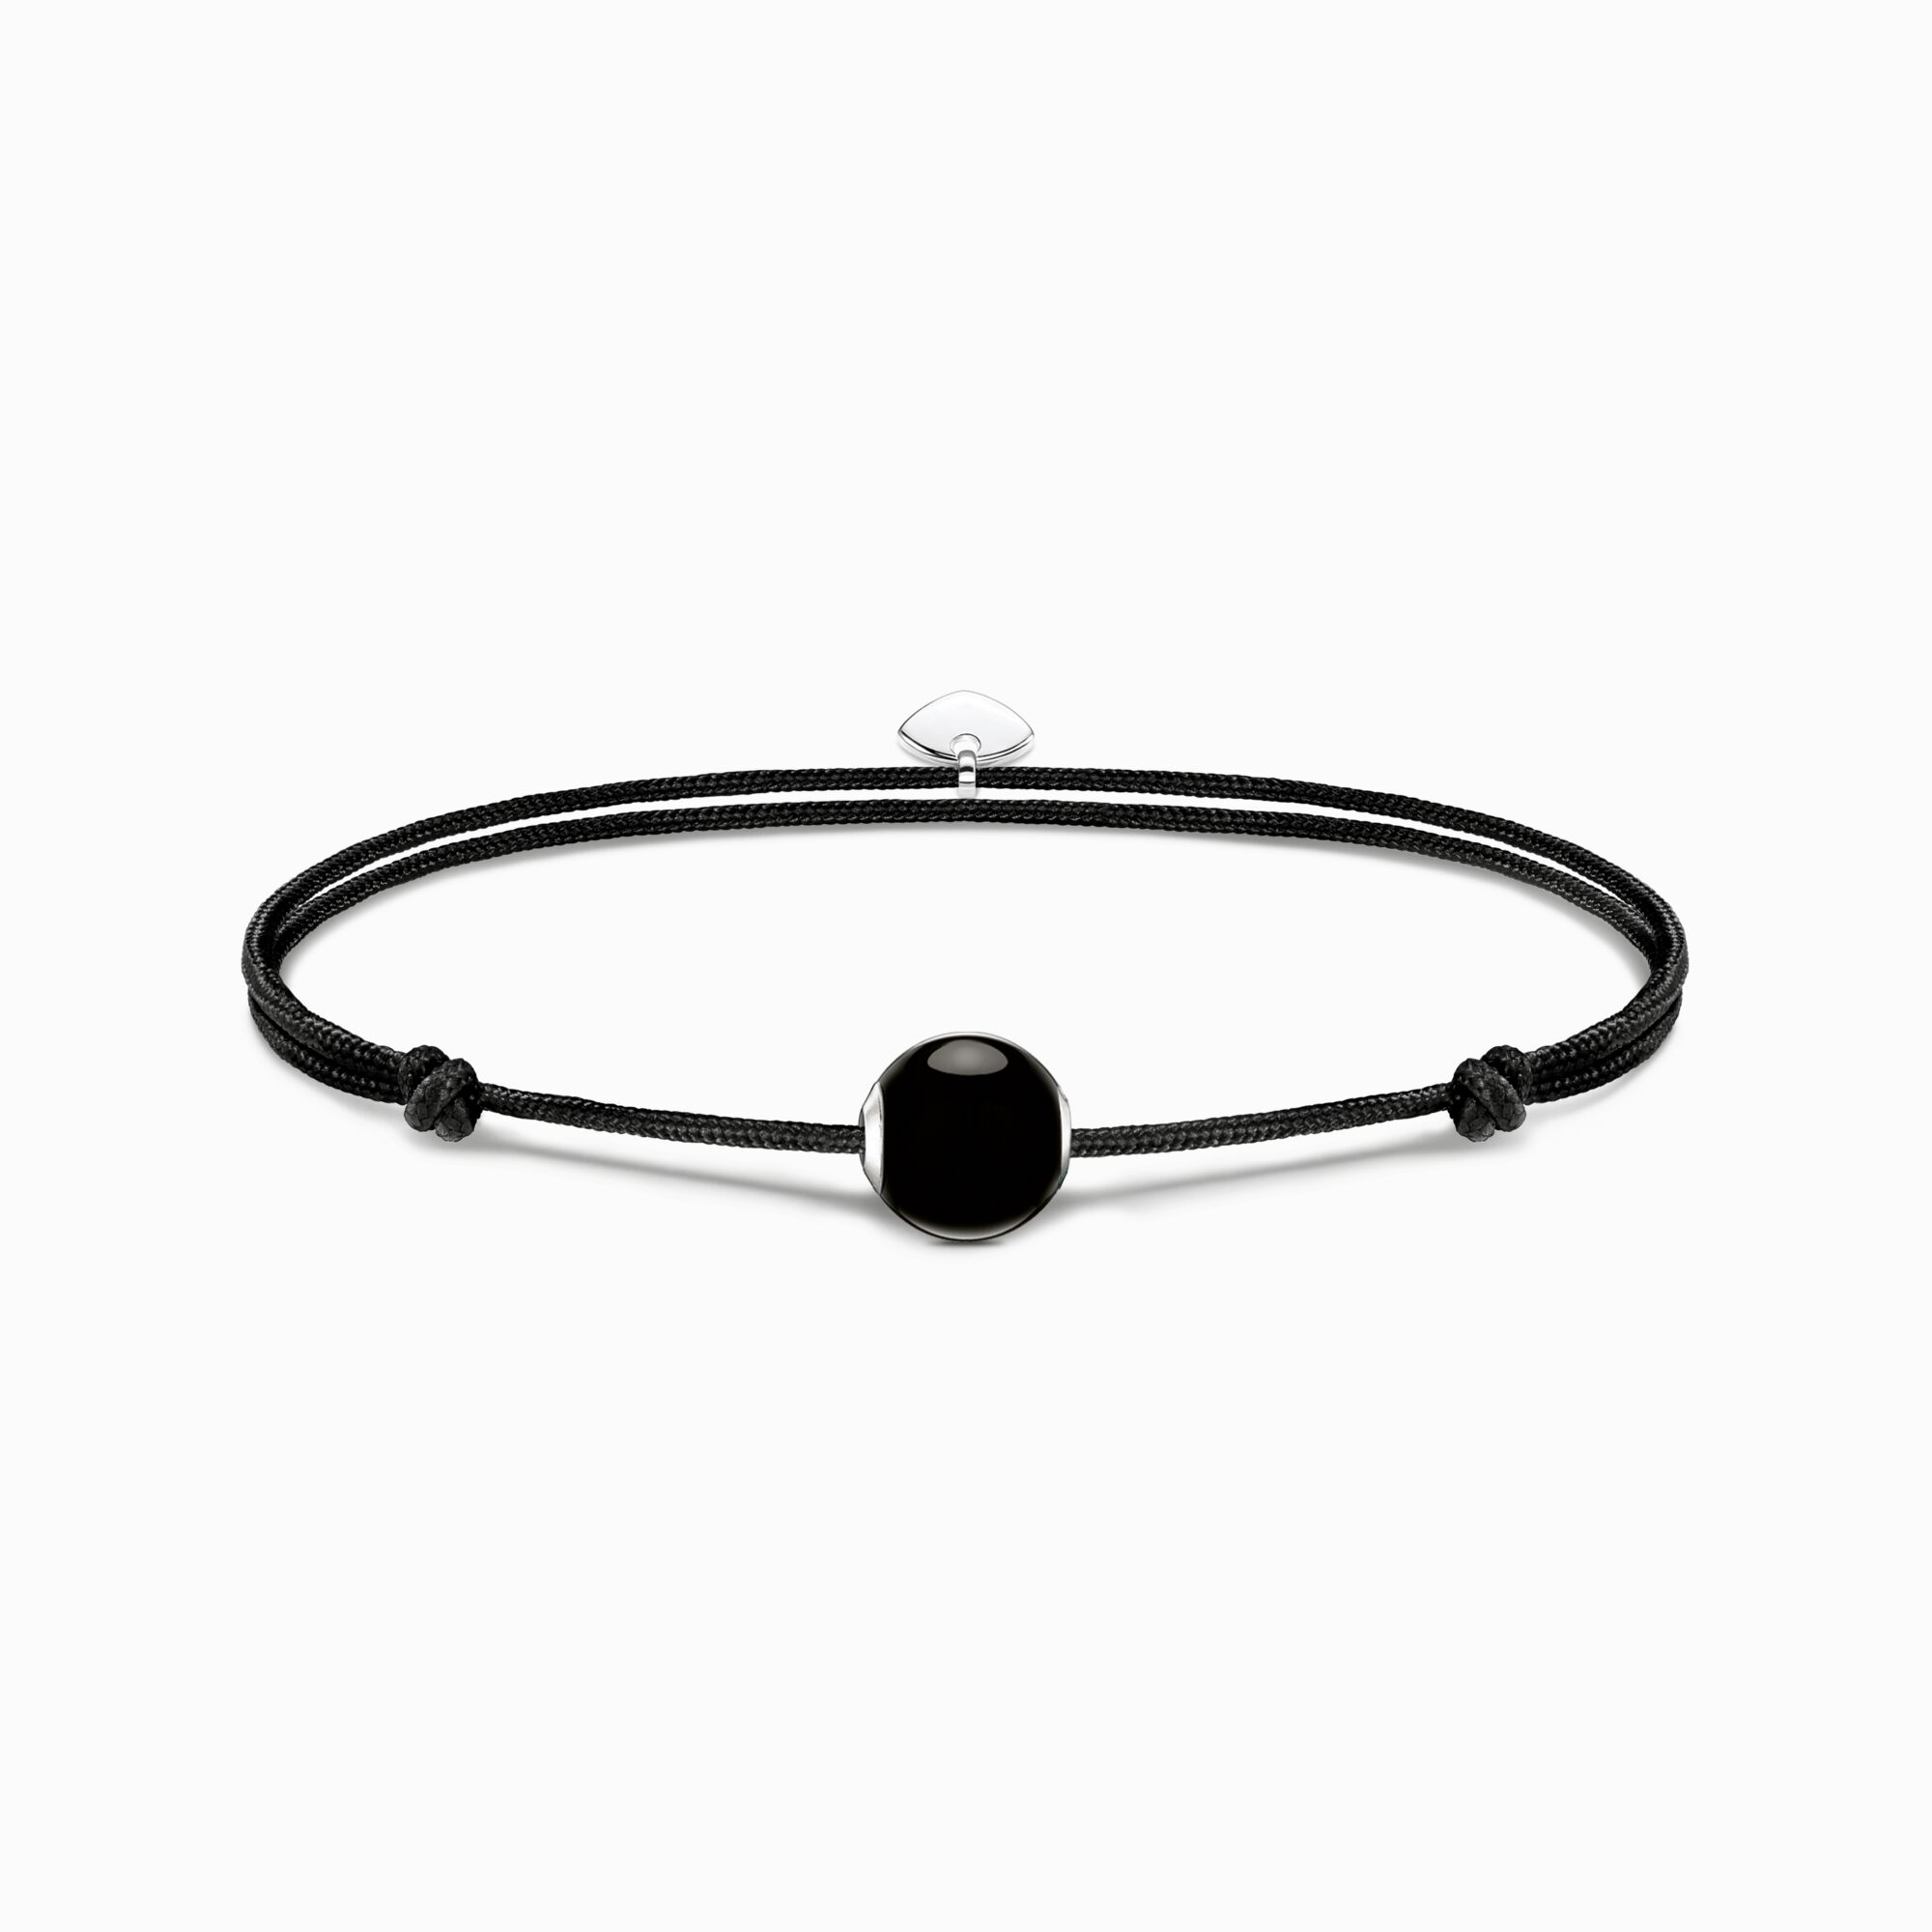 Bracelet Karma Secret with black obsidian Bead polished from the Karma Beads collection in the THOMAS SABO online store